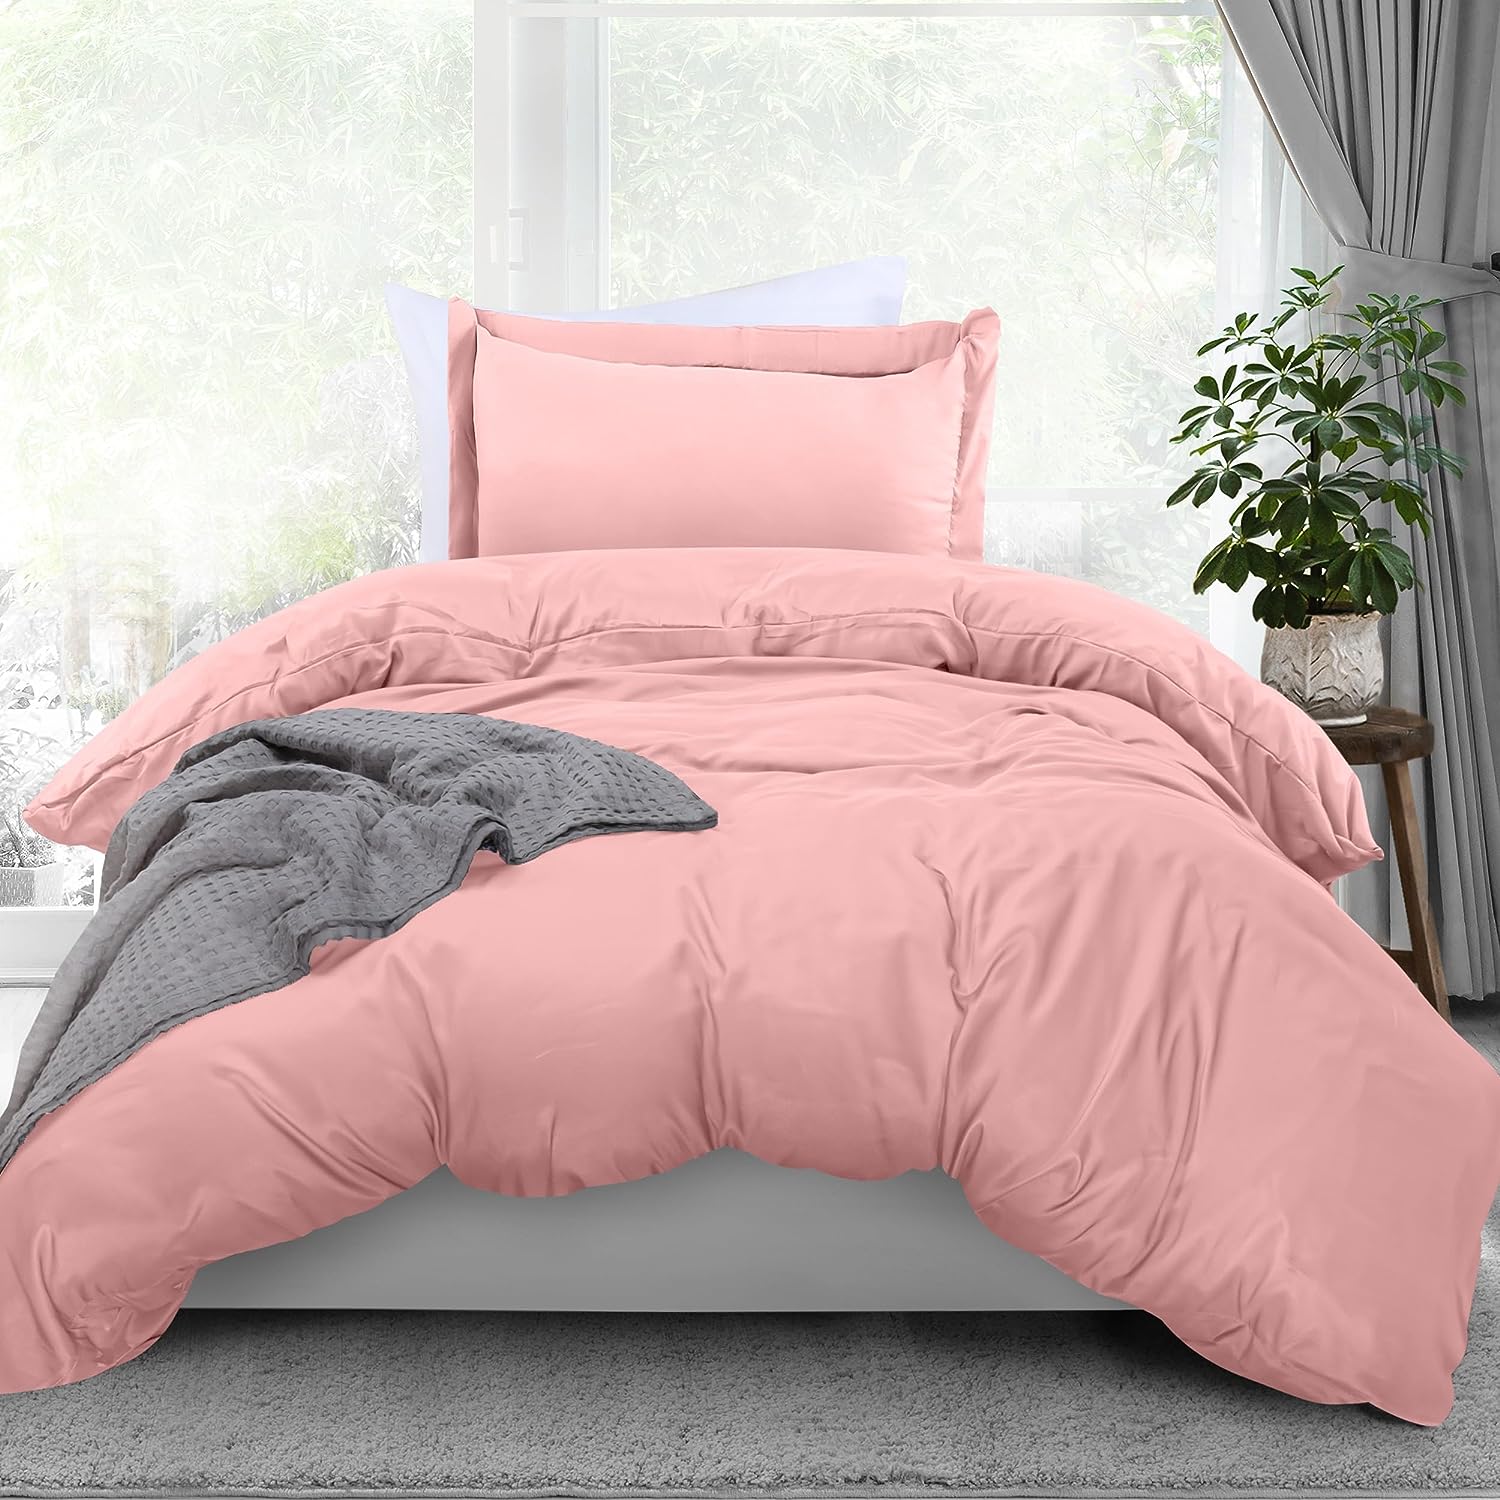 Utopia Bedding Duvet Cover Set - Twin Size, Pink